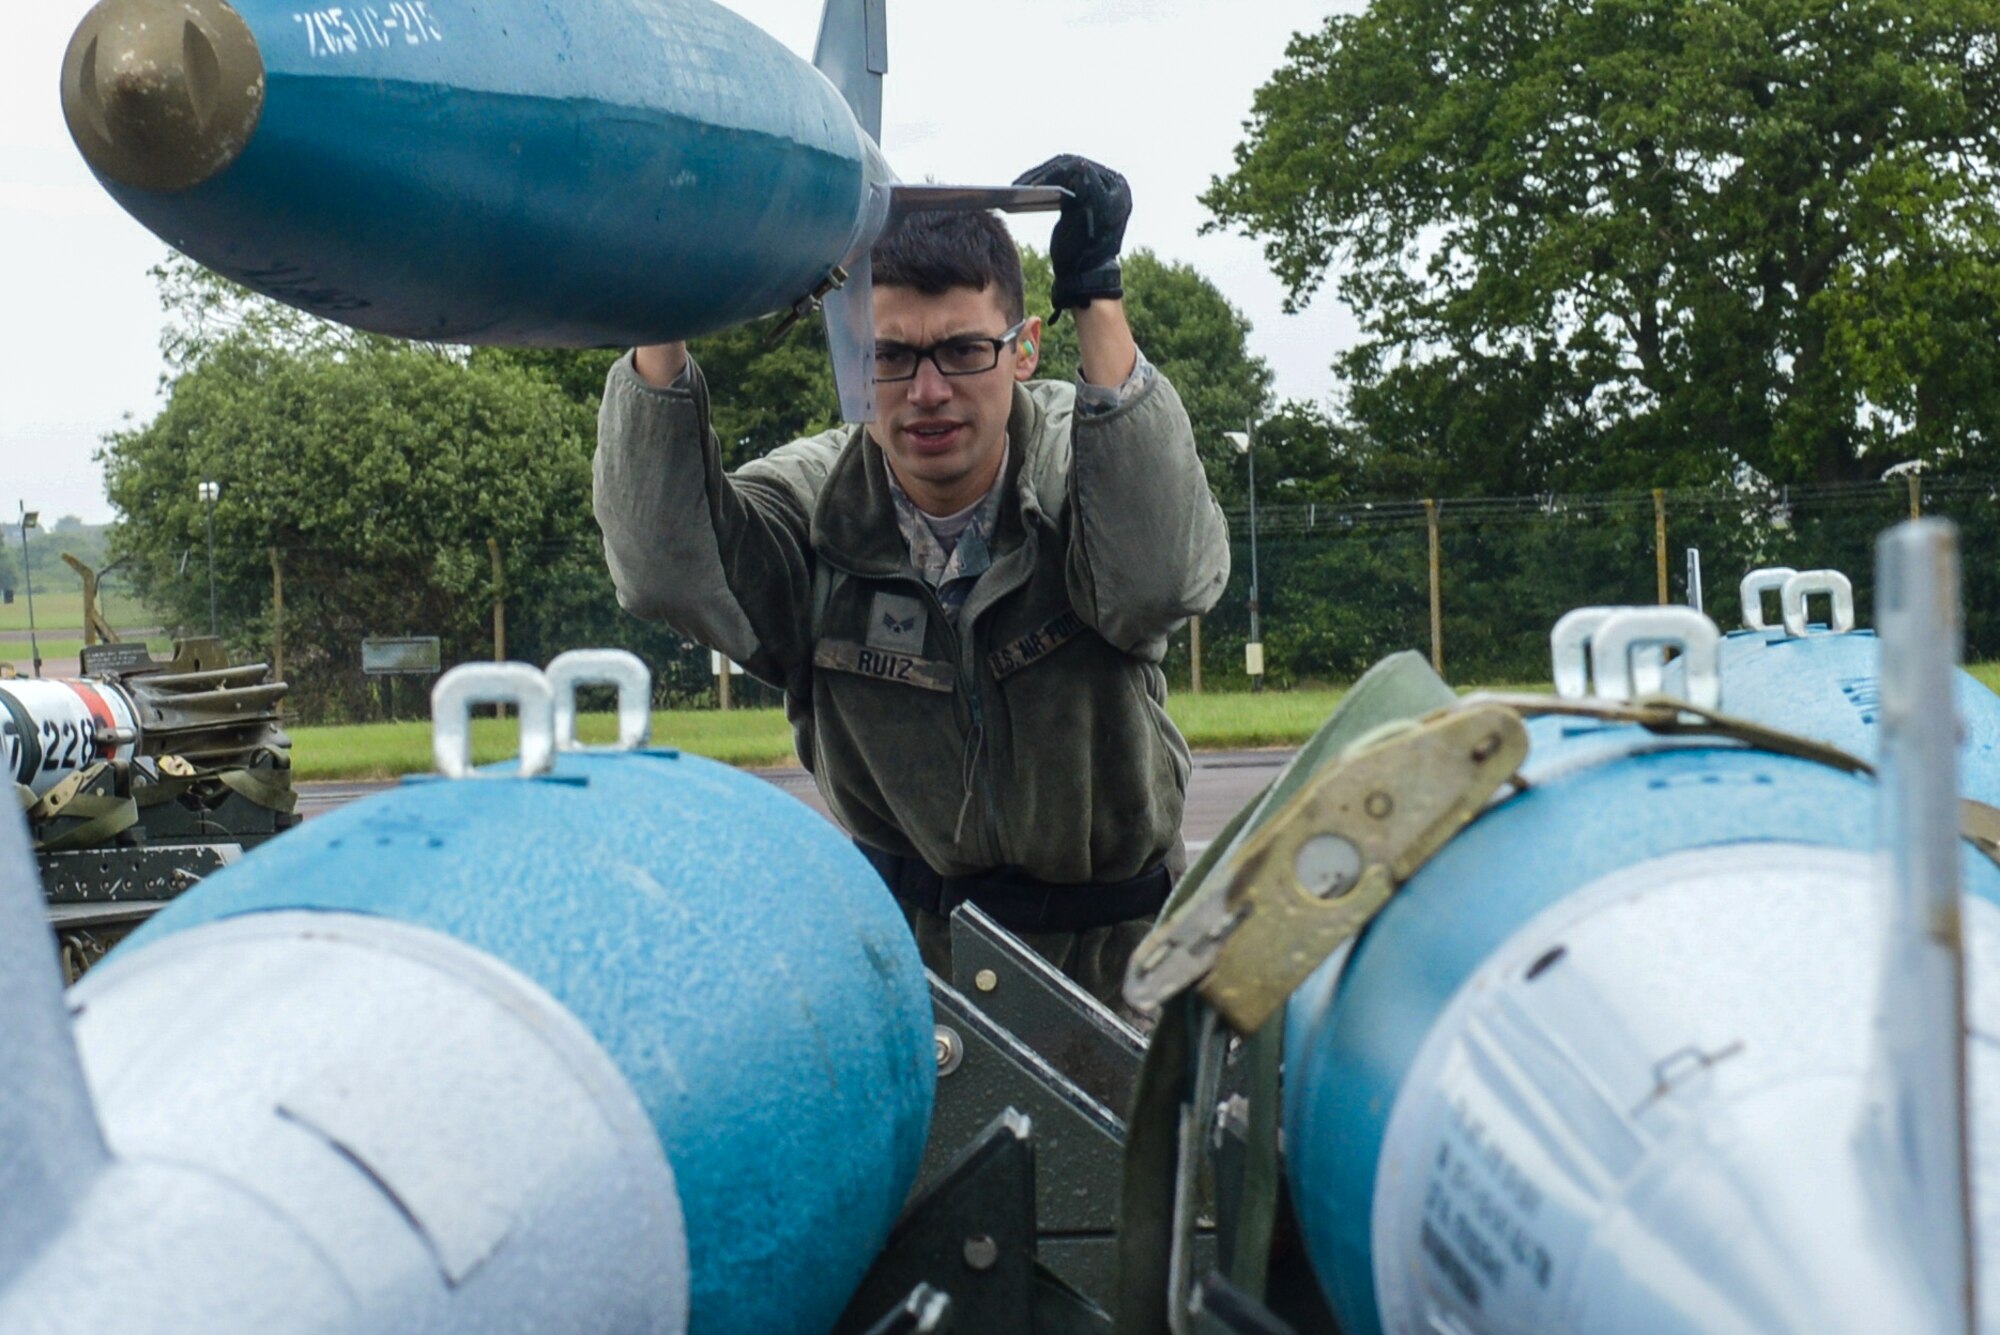 U.S. Air Force Senior Airman Michael Ruiz, 2nd Aircraft Maintenance Squadron load crew team member, guides BDU-50s (inert munitions) general purpose unguided conventional weapons at Royal Air Force Fairford, U.K., June 5, 2017. Load crews are participating in Saber Strike 2017, an annual, multinational, exercise designed to strengthen interoperability and cohesiveness between NATO allies and partner nations. (U.S. Air Force photo/Senior Airman Curt Beach)